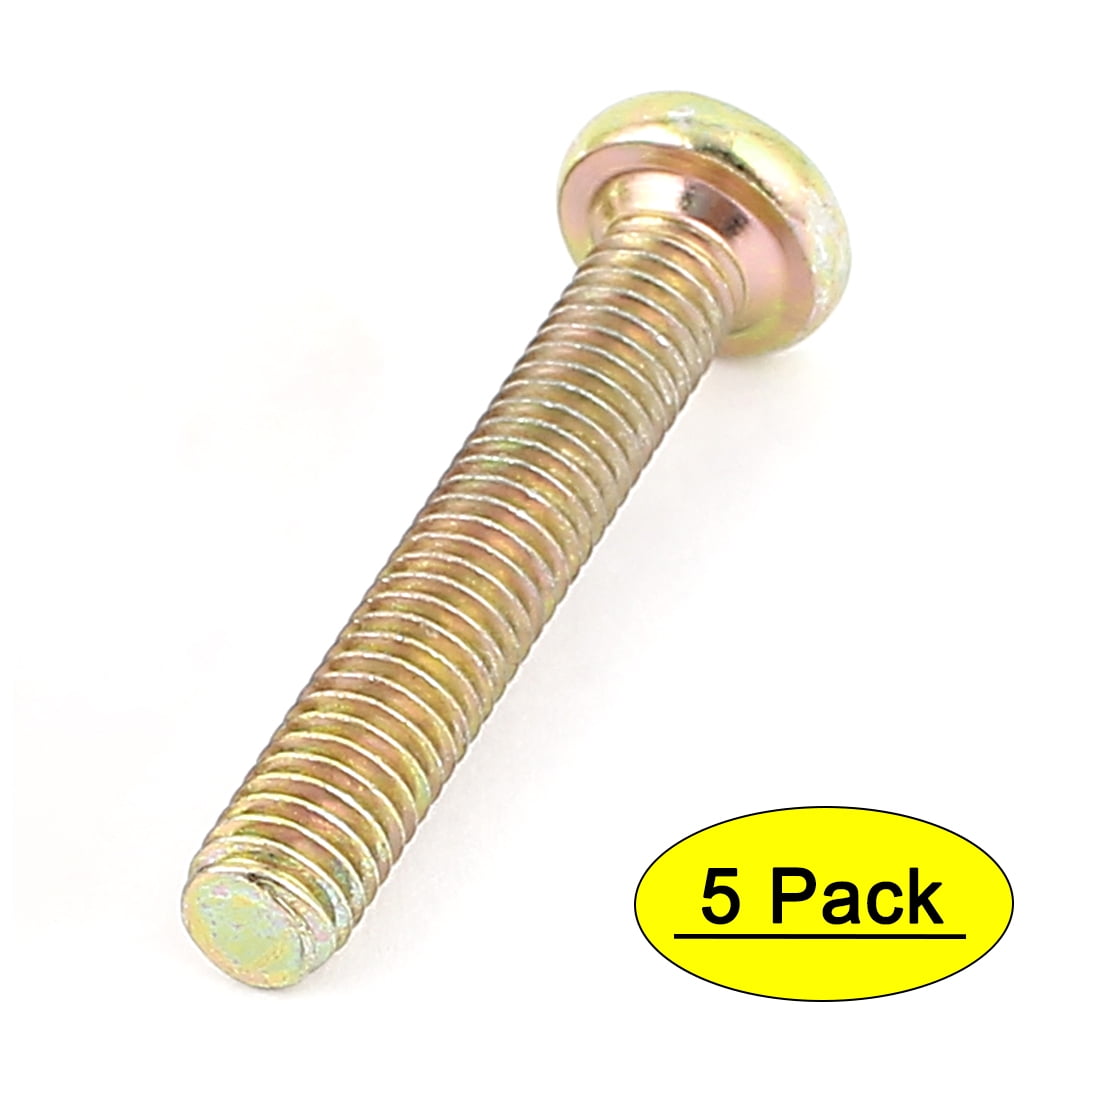 60mm screw Hex Socket Bolts Screws Stainless Steel Silver Details about   450Pcs M6 20mm nut 